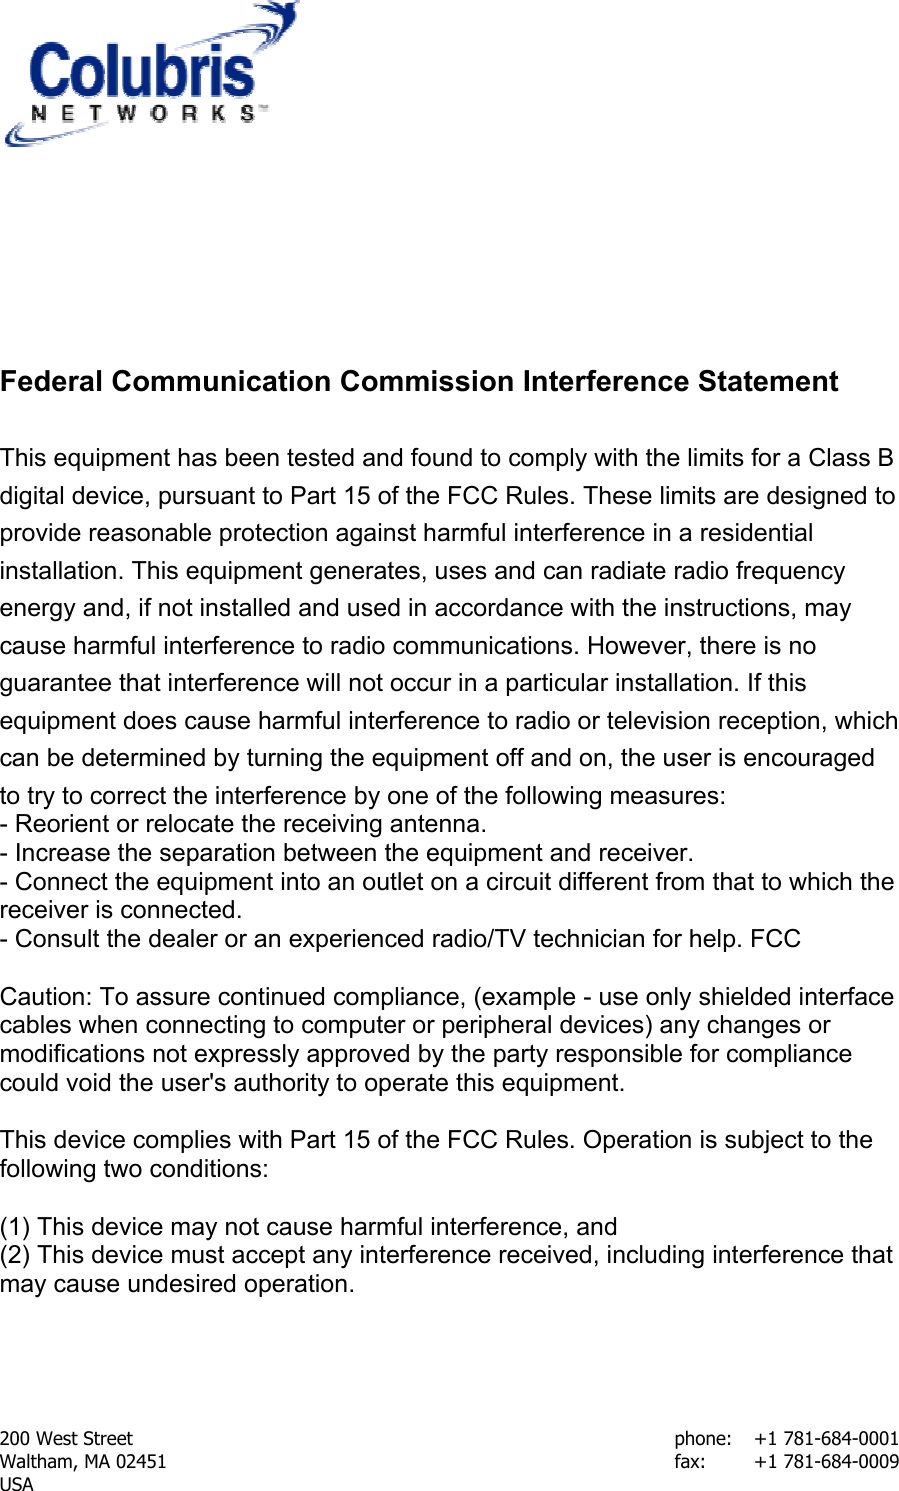  200 West Street    phone:  +1 781-684-0001 Waltham, MA 02451    fax:    +1 781-684-0009 USA    Federal Communication Commission Interference Statement  This equipment has been tested and found to comply with the limits for a Class B digital device, pursuant to Part 15 of the FCC Rules. These limits are designed to provide reasonable protection against harmful interference in a residential installation. This equipment generates, uses and can radiate radio frequency energy and, if not installed and used in accordance with the instructions, may cause harmful interference to radio communications. However, there is no guarantee that interference will not occur in a particular installation. If this equipment does cause harmful interference to radio or television reception, which can be determined by turning the equipment off and on, the user is encouraged to try to correct the interference by one of the following measures:  - Reorient or relocate the receiving antenna.  - Increase the separation between the equipment and receiver.  - Connect the equipment into an outlet on a circuit different from that to which the receiver is connected.  - Consult the dealer or an experienced radio/TV technician for help. FCC   Caution: To assure continued compliance, (example - use only shielded interface cables when connecting to computer or peripheral devices) any changes or modifications not expressly approved by the party responsible for compliance could void the user&apos;s authority to operate this equipment.   This device complies with Part 15 of the FCC Rules. Operation is subject to the following two conditions:   (1) This device may not cause harmful interference, and  (2) This device must accept any interference received, including interference that may cause undesired operation.     